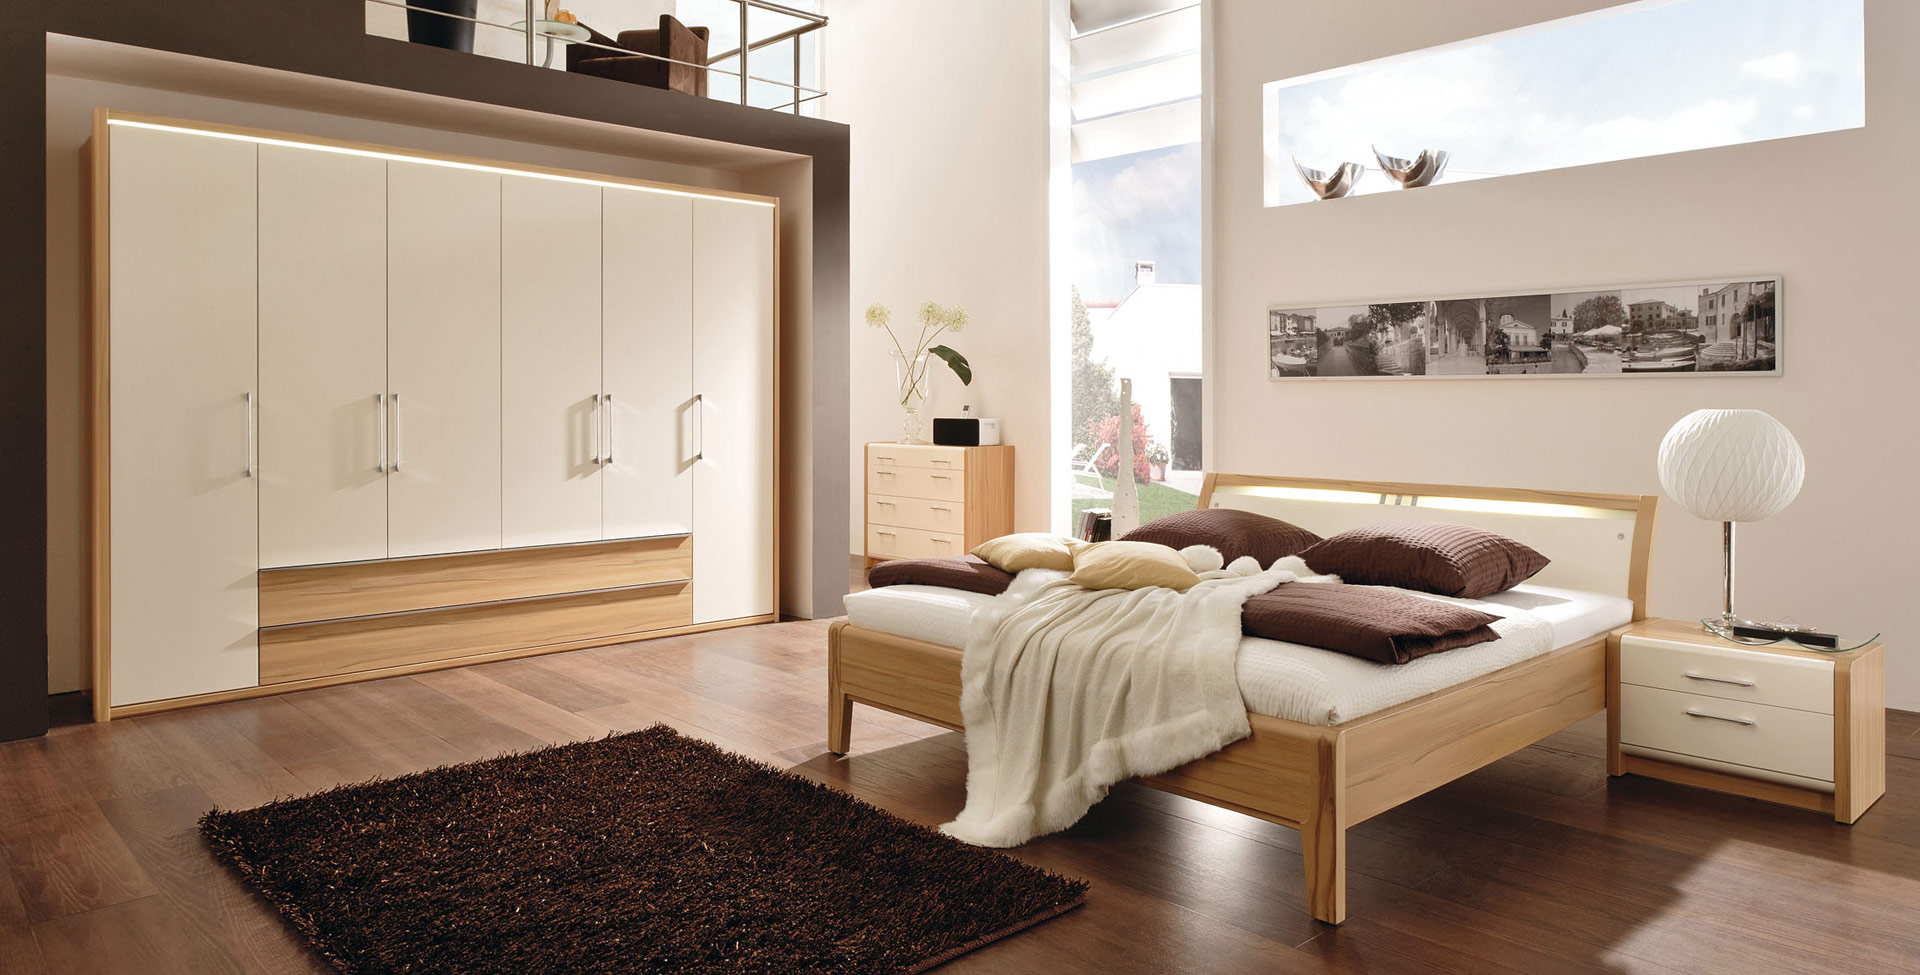 Luxurious and creative Bedroom systems made to measure